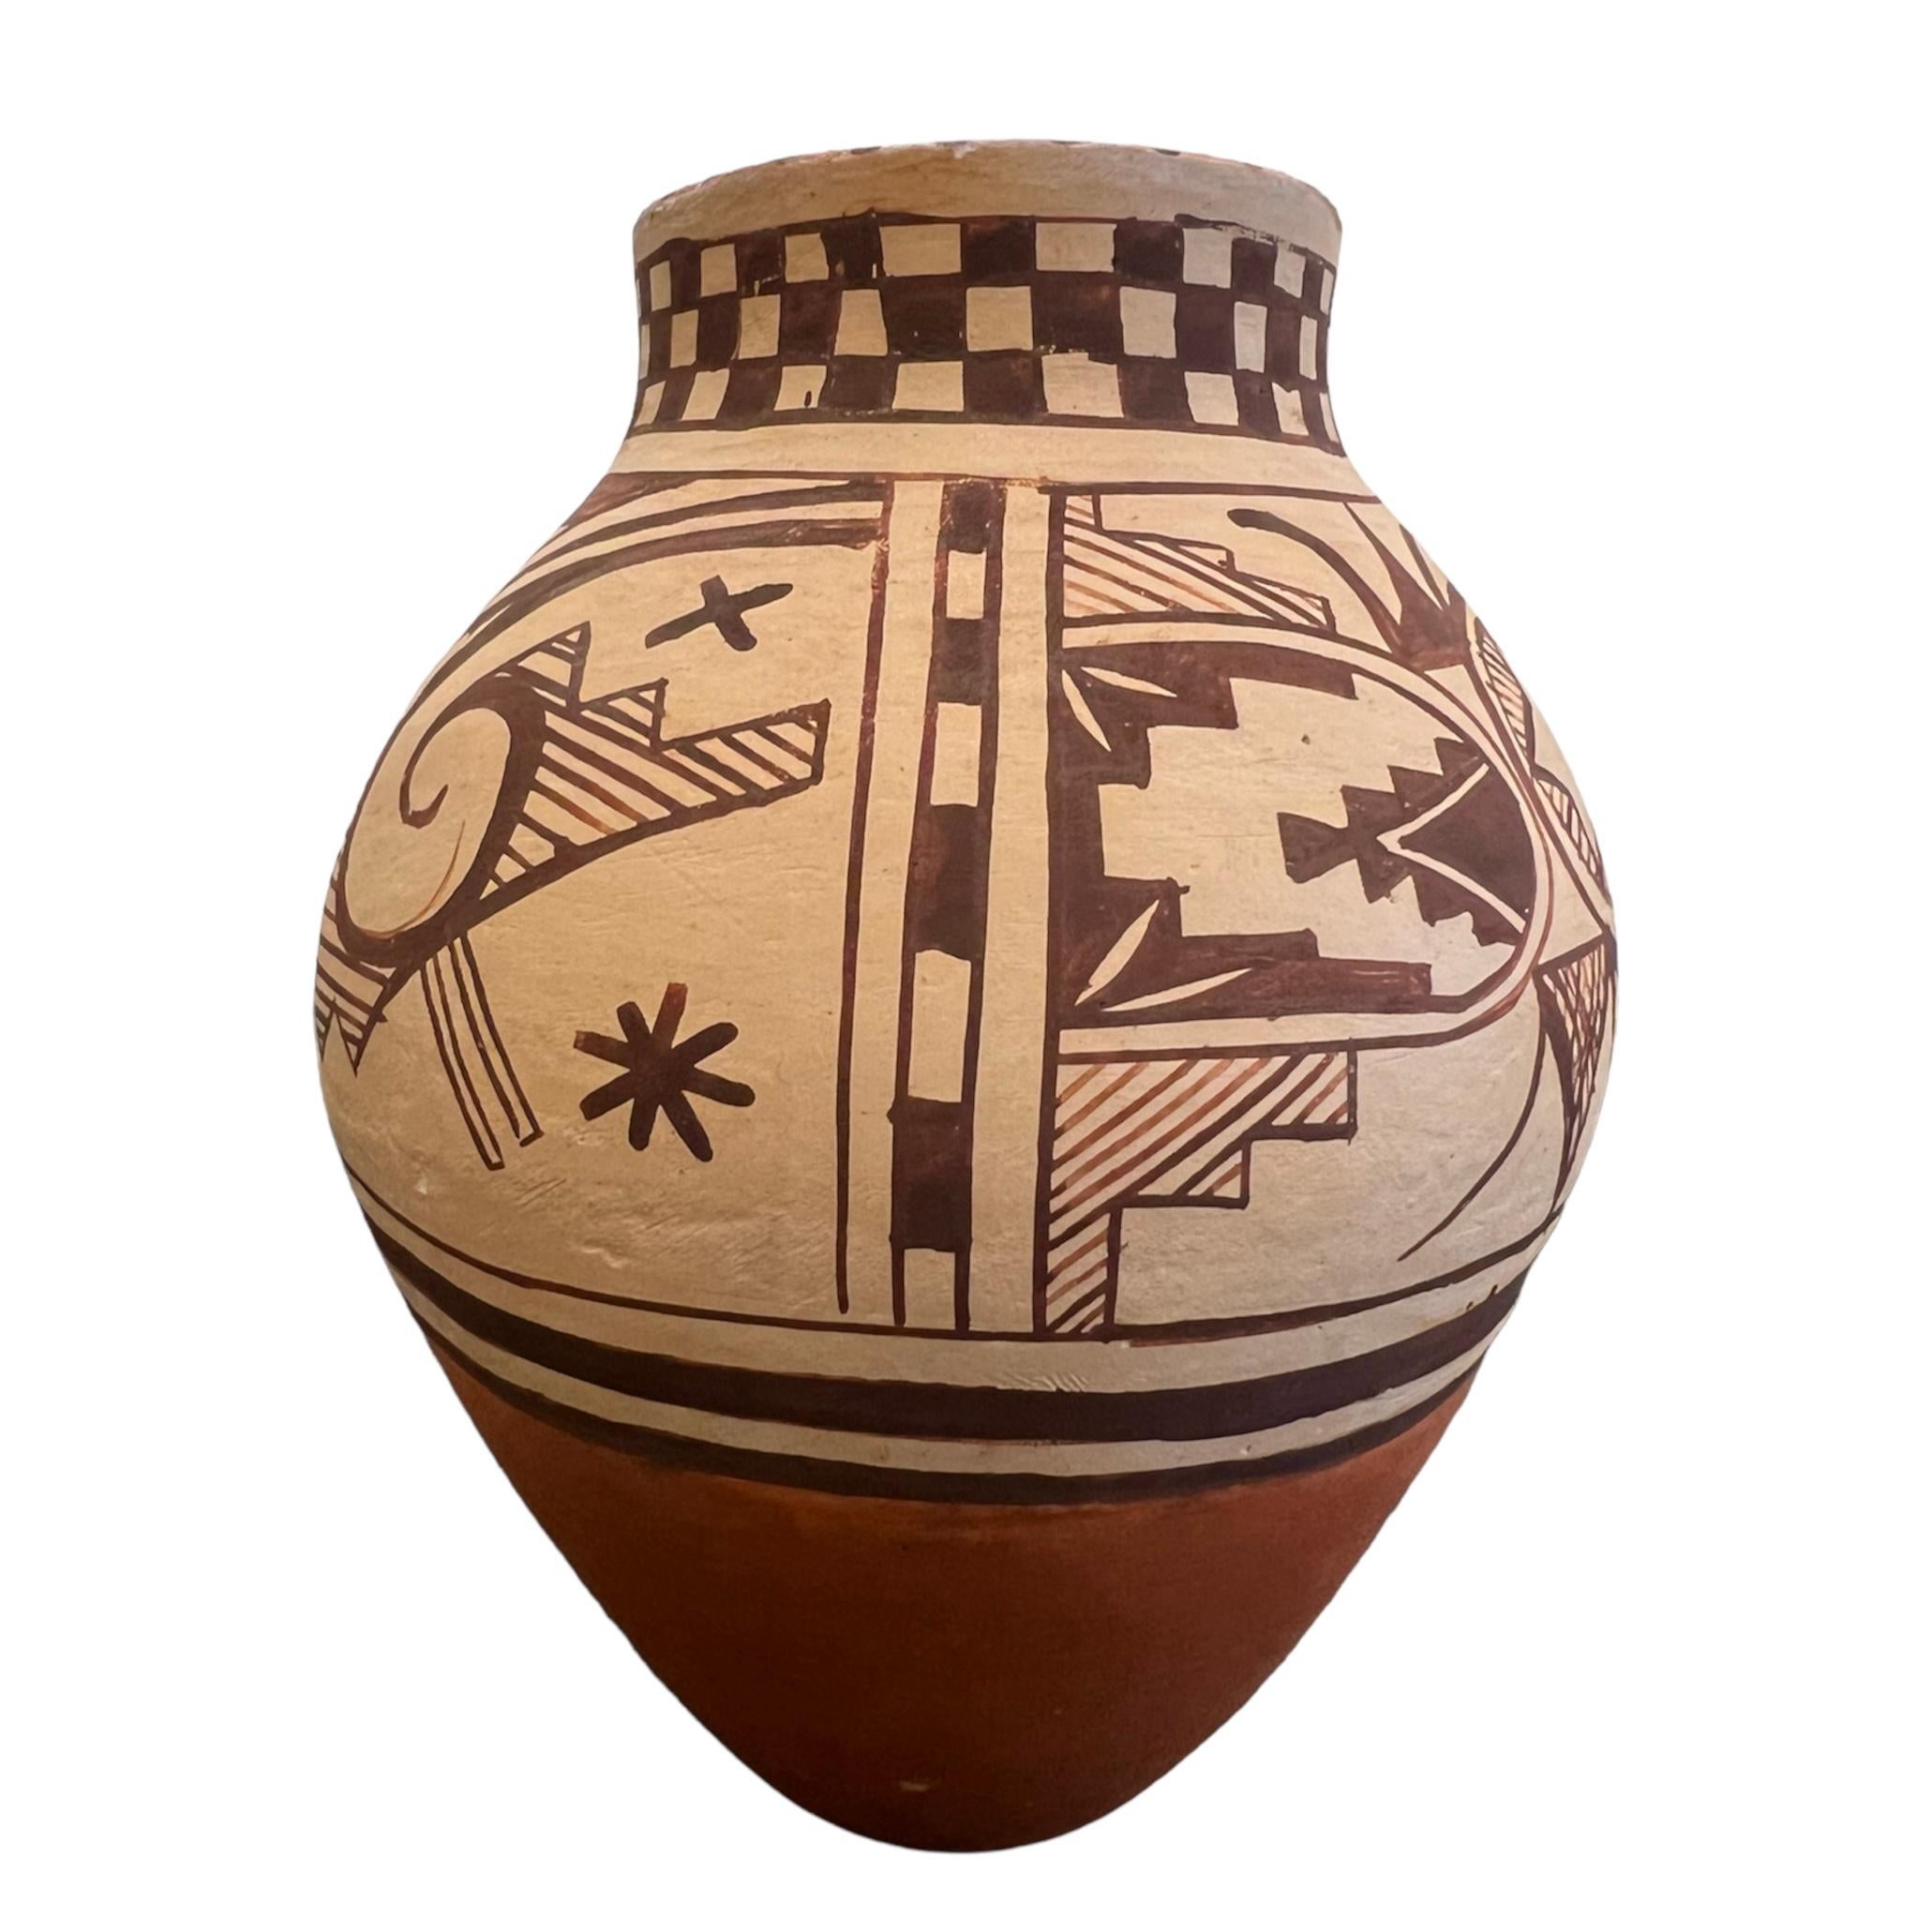 $750
A collaborative work by Jacob and Kelly Frye. Vase has a Hopi slip with hand painting in a  tansy mustard glaze.  

6”x 5”x 5”

Born in Santa Fe, New Mexico, Jacob Thomas Frye is a fourth-generation potter and painter from Tesuque Pueblo.